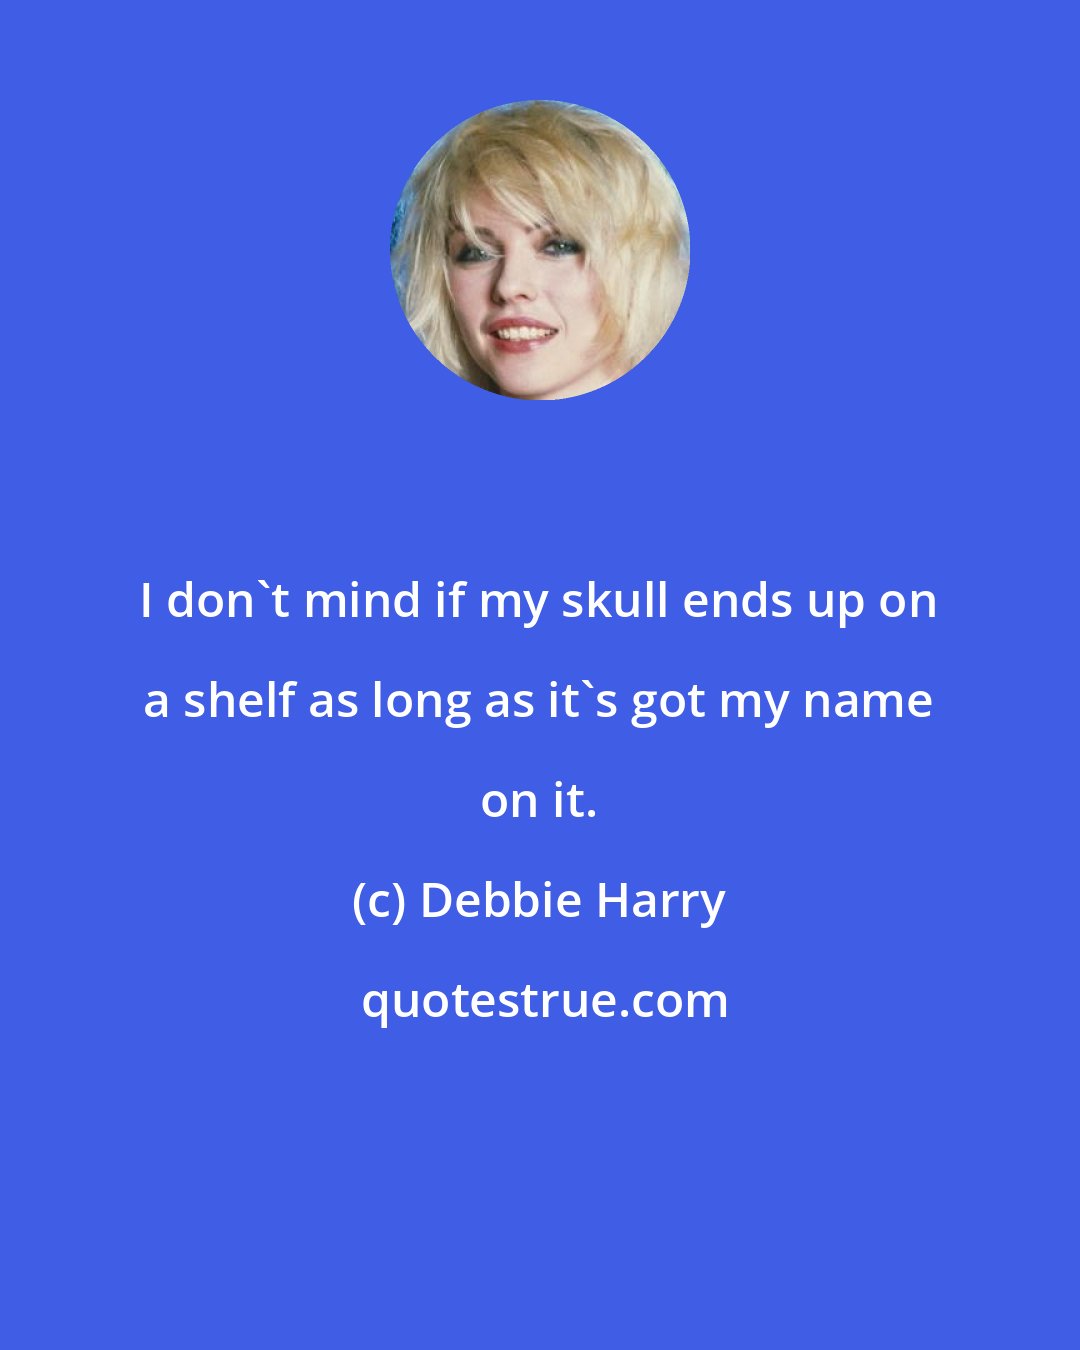 Debbie Harry: I don't mind if my skull ends up on a shelf as long as it's got my name on it.